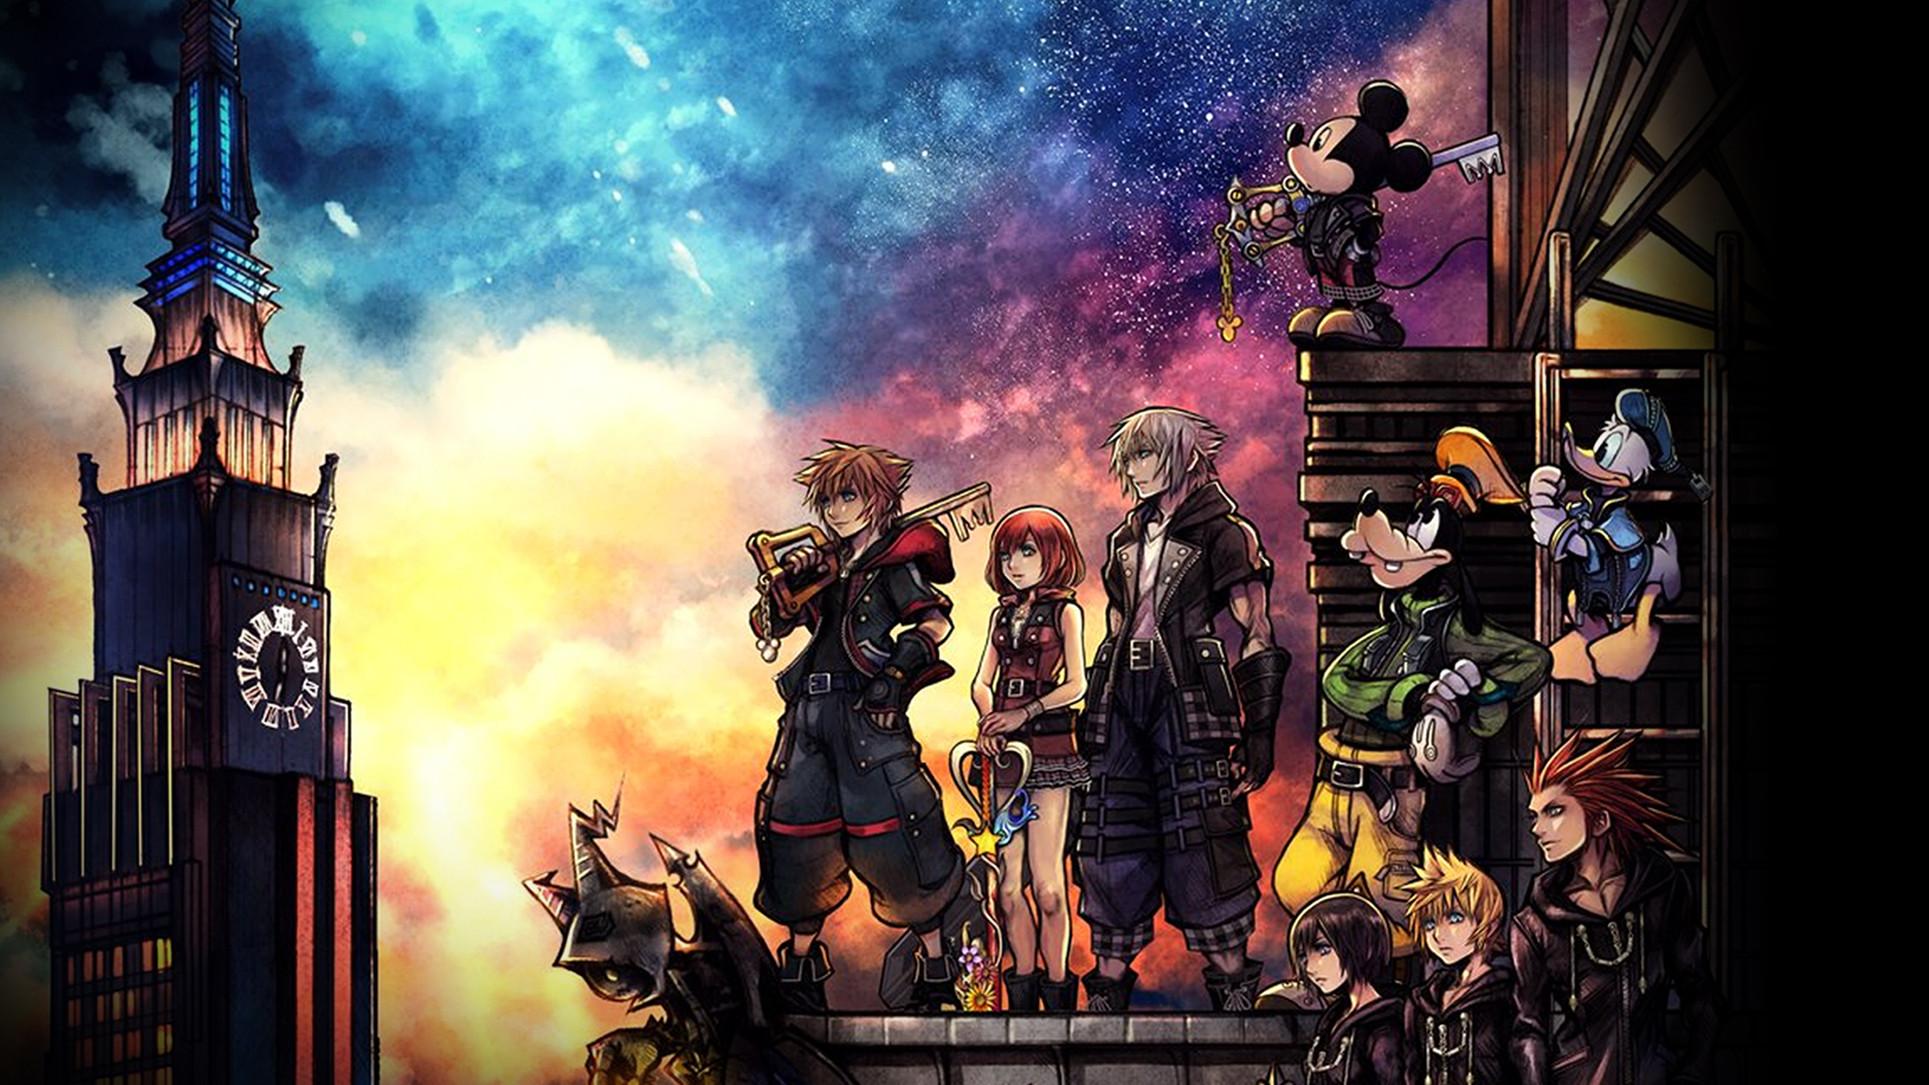 Kingdom Hearts 3 Wallpapers Top Free Kingdom Hearts 3 Backgrounds Wallpaperaccess